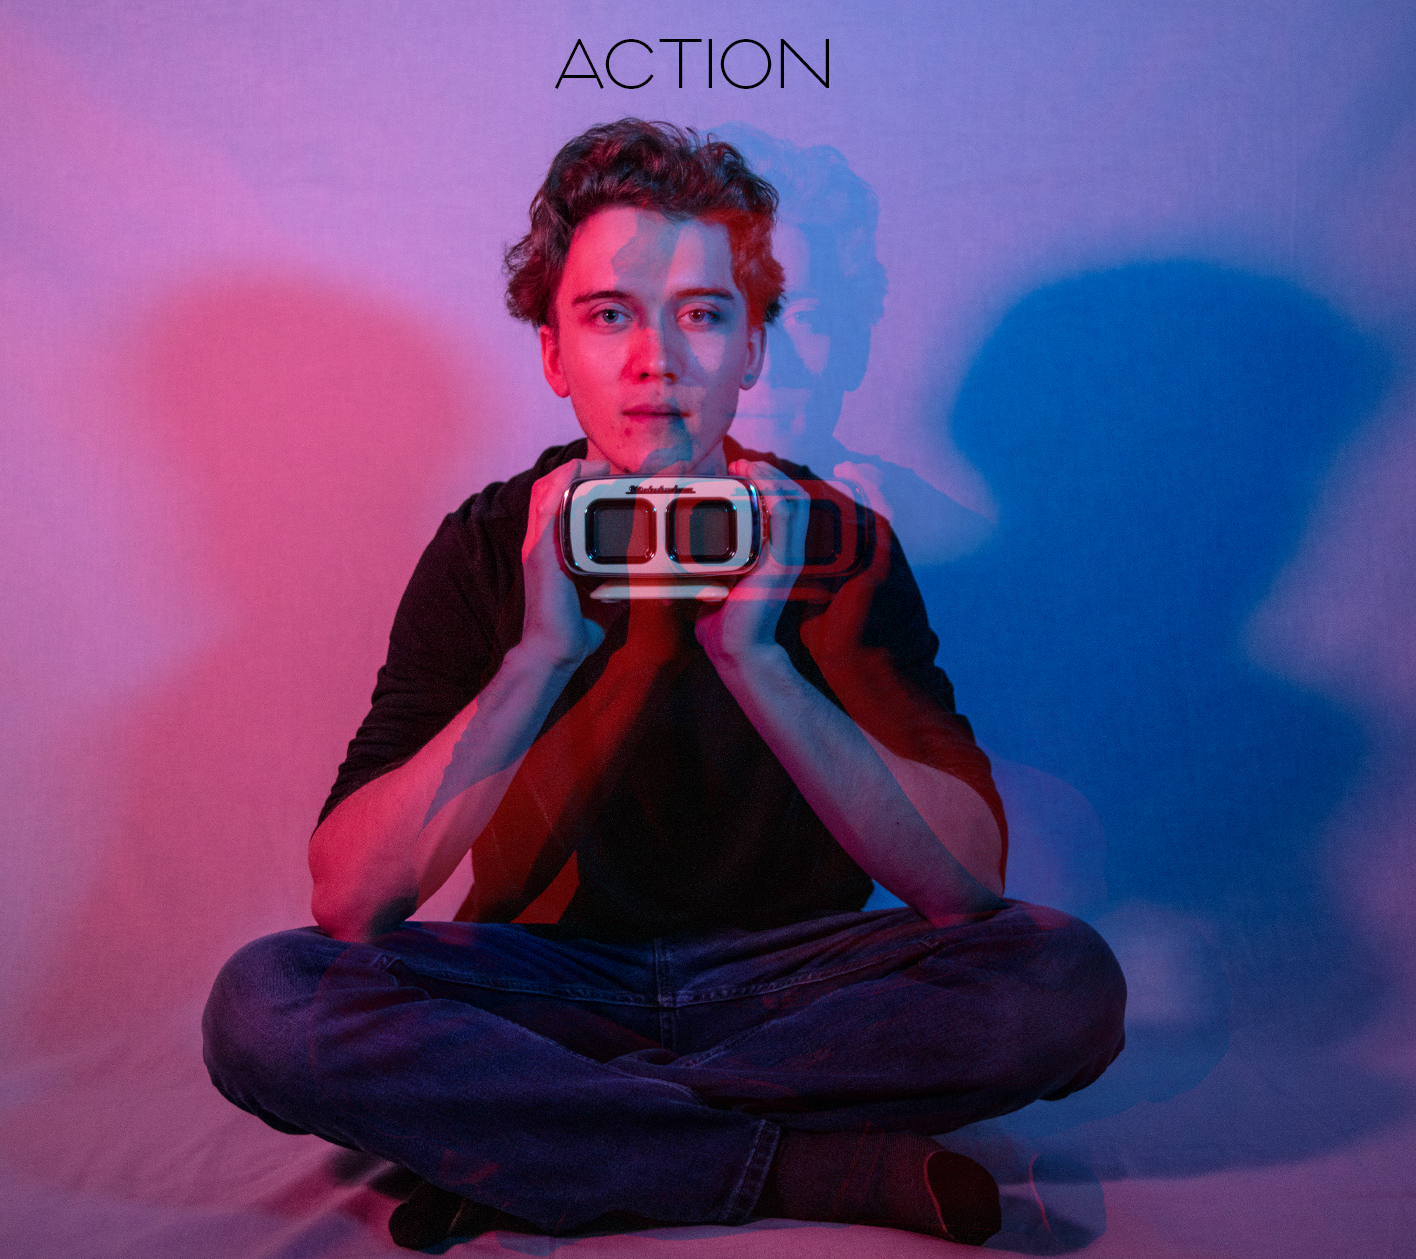 An album cover photo that Jailyn took. The name of the album action is at the top and the main photo is a white man with short blonde hair and blue eyes. He is sitting criss-cross in front of a white background and holding a clock in his hands.